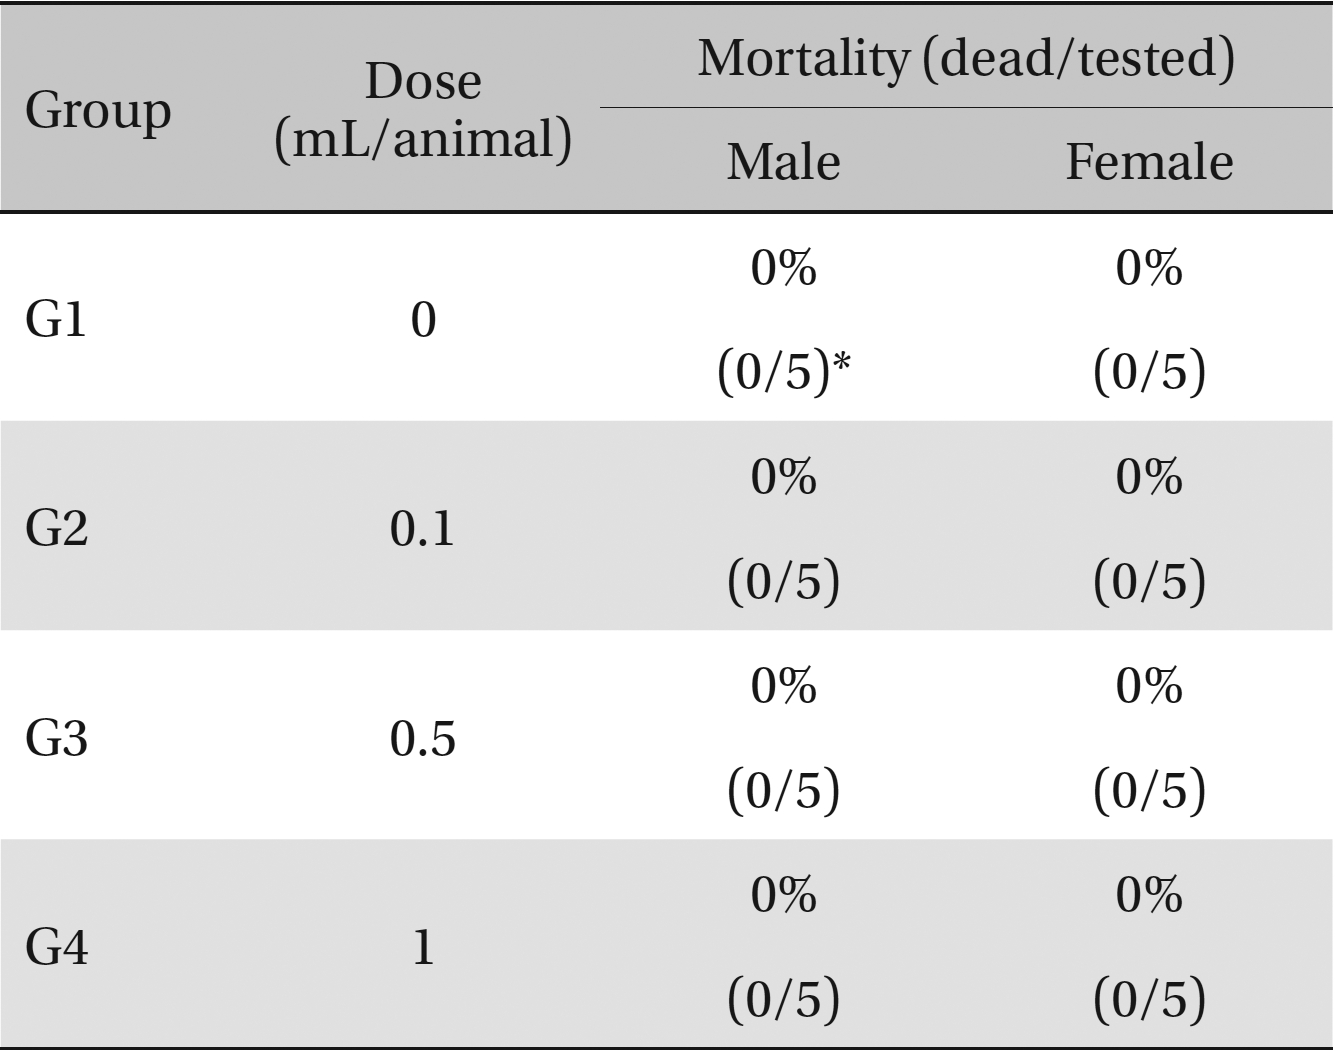 Mortalities. A single intravenous injection dose of SMS at
the each groups including 1.0 mL/animal group caused no mortalities.